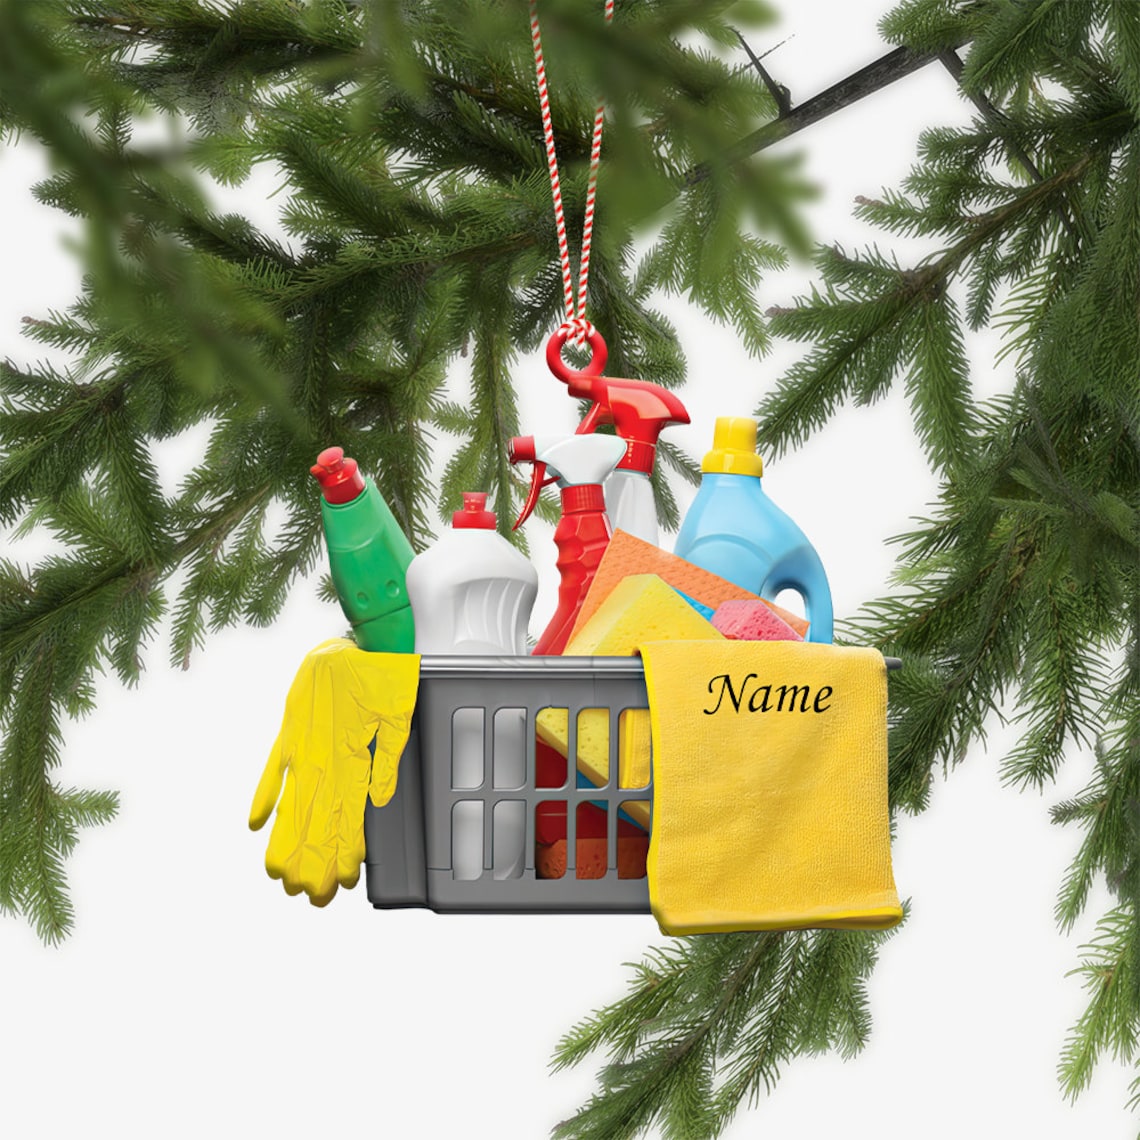 Personalized Housekeeping Ornament/ Cleaning Service Christmas Ornament/ Housekeeper Ornament/ Janitor Cleaning Lady Ornament